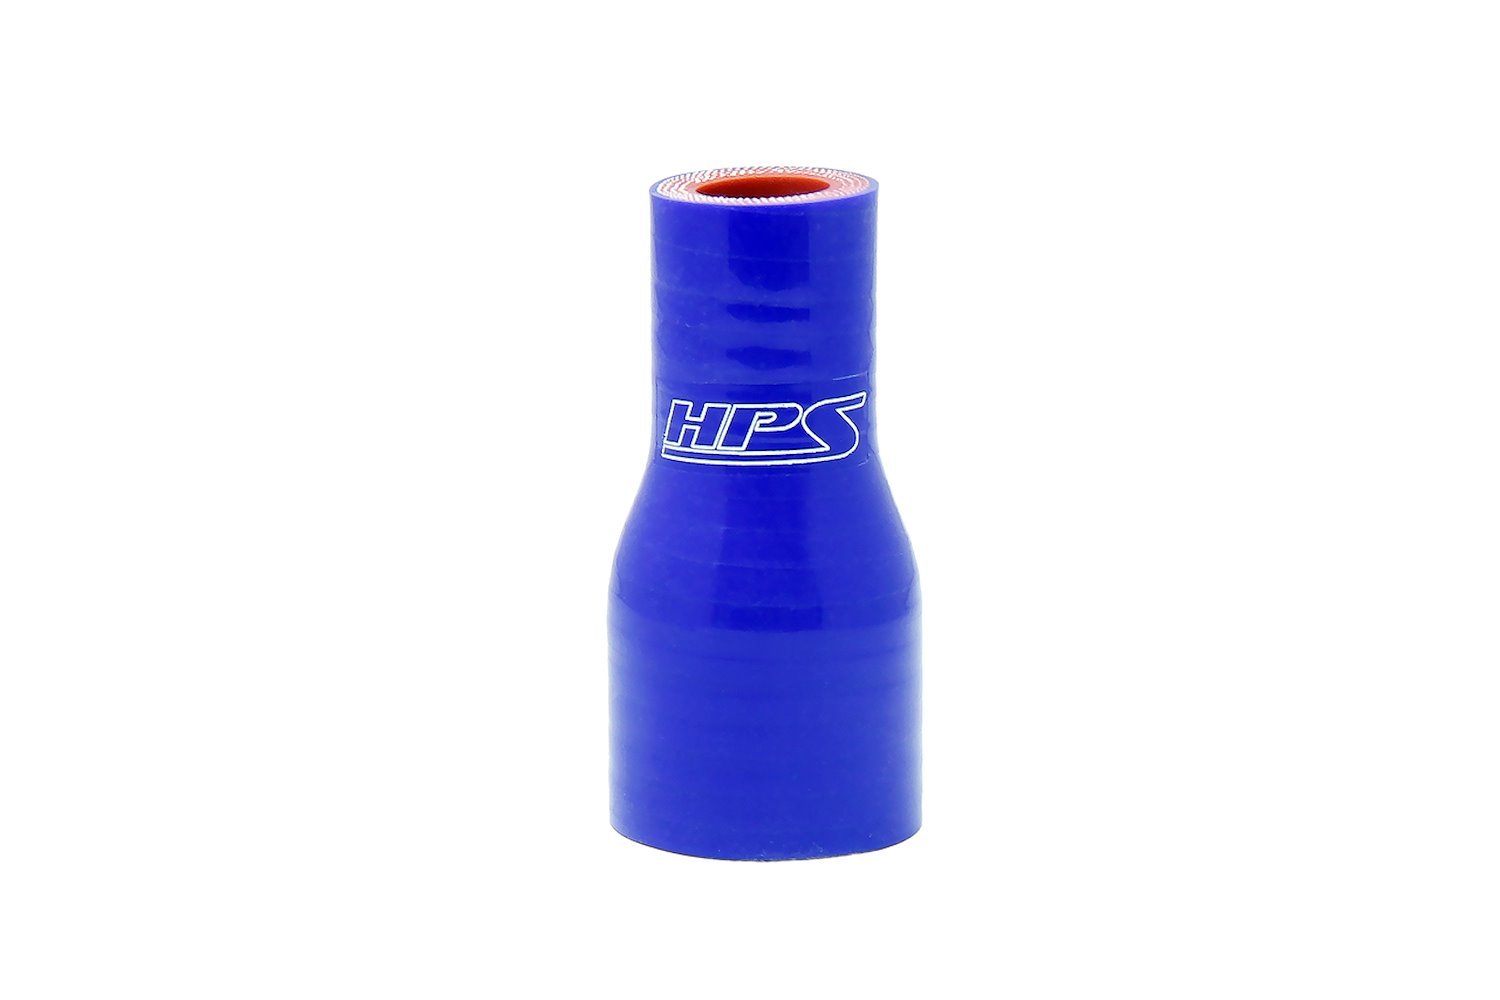 HTSR-031-050-BLUE Silicone Reducer Hose, High-Temp 4-Ply Reinforced, 5/16 in. - 1/2 in. ID, 4 in. Long, Blue